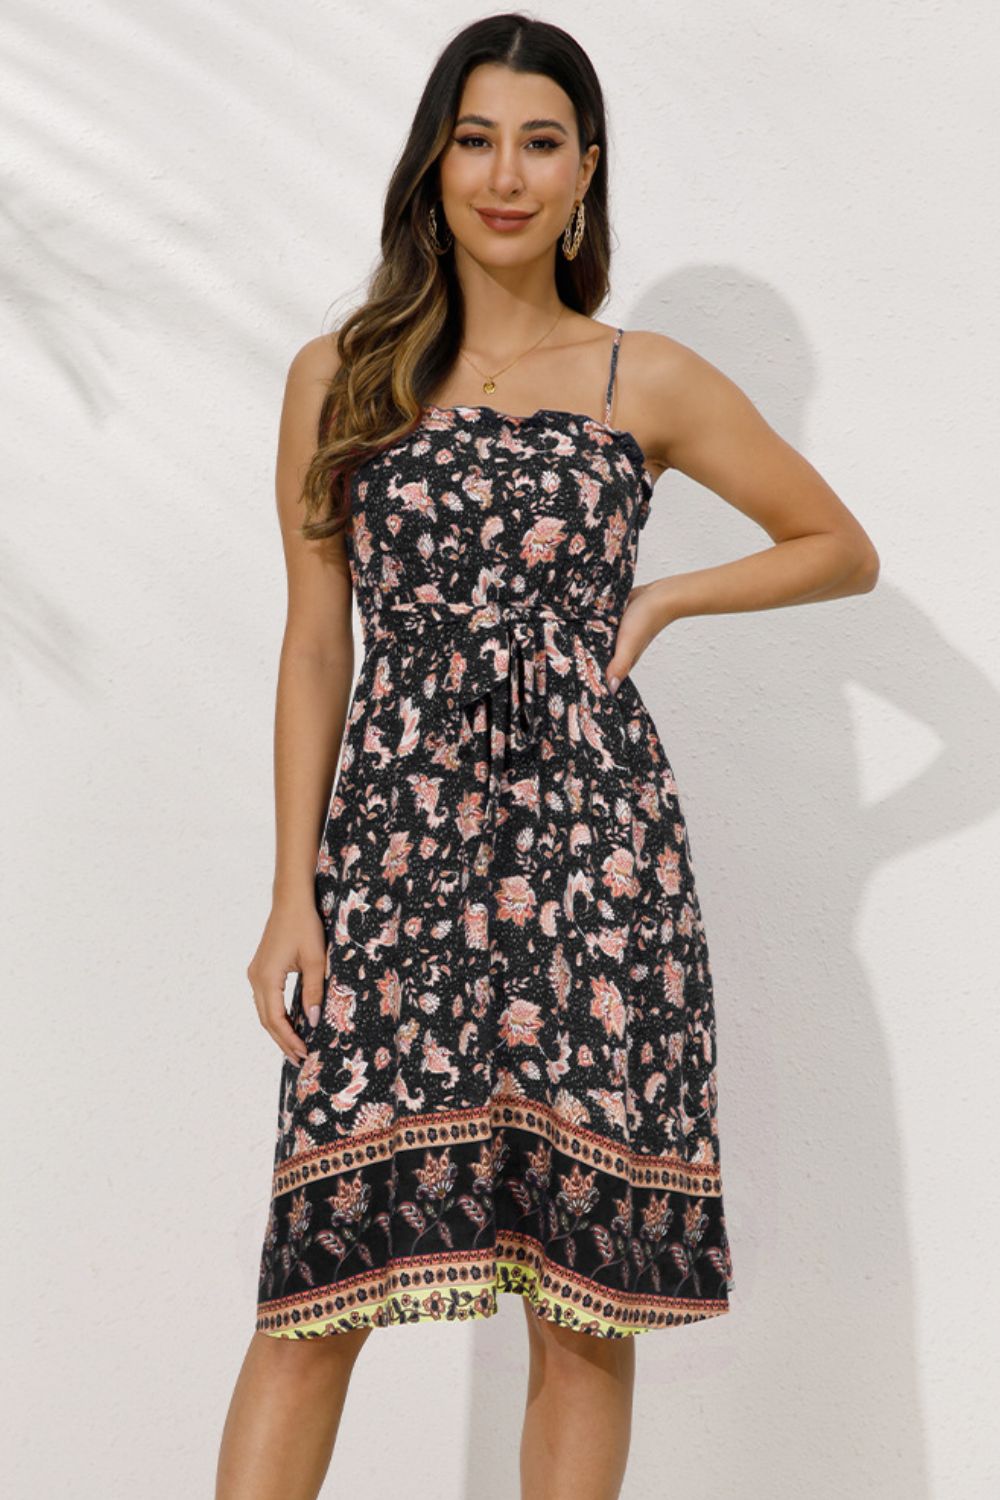 Catch The Moment Bohemian Floral Dress - black  floral knee length dress with spaghetti straps. #Firefly Lane Boutique1